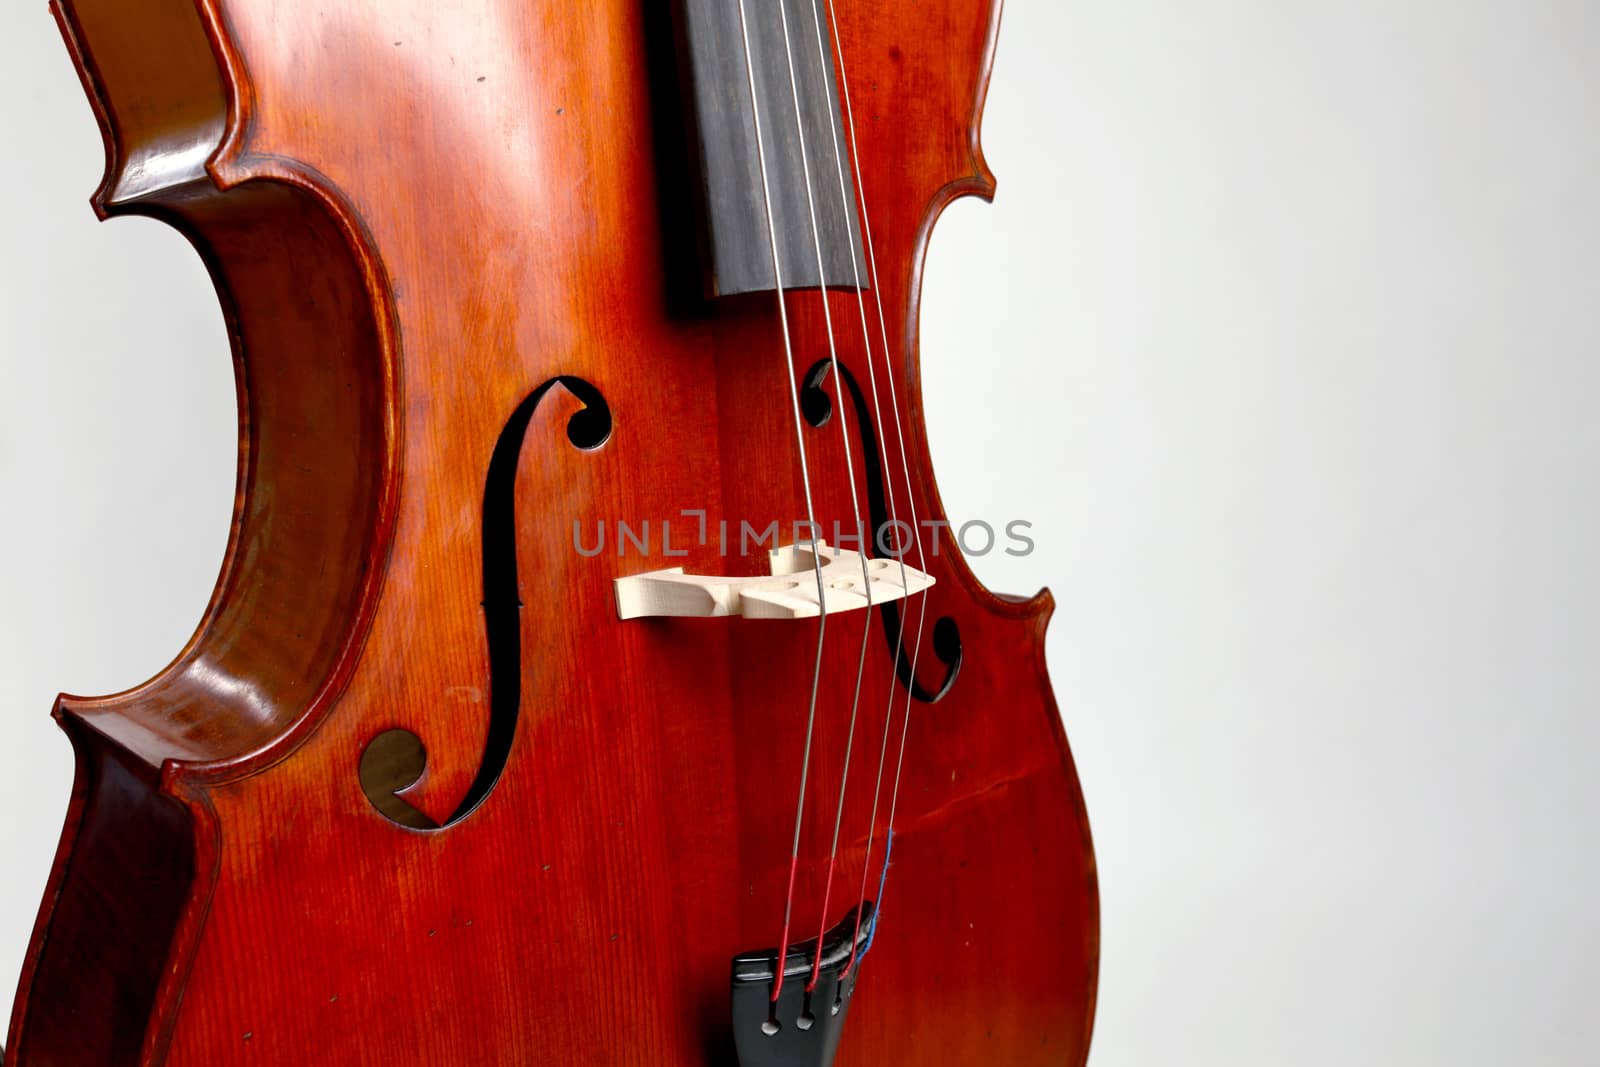 Old double bass c bout and belly on white background by Ivanko